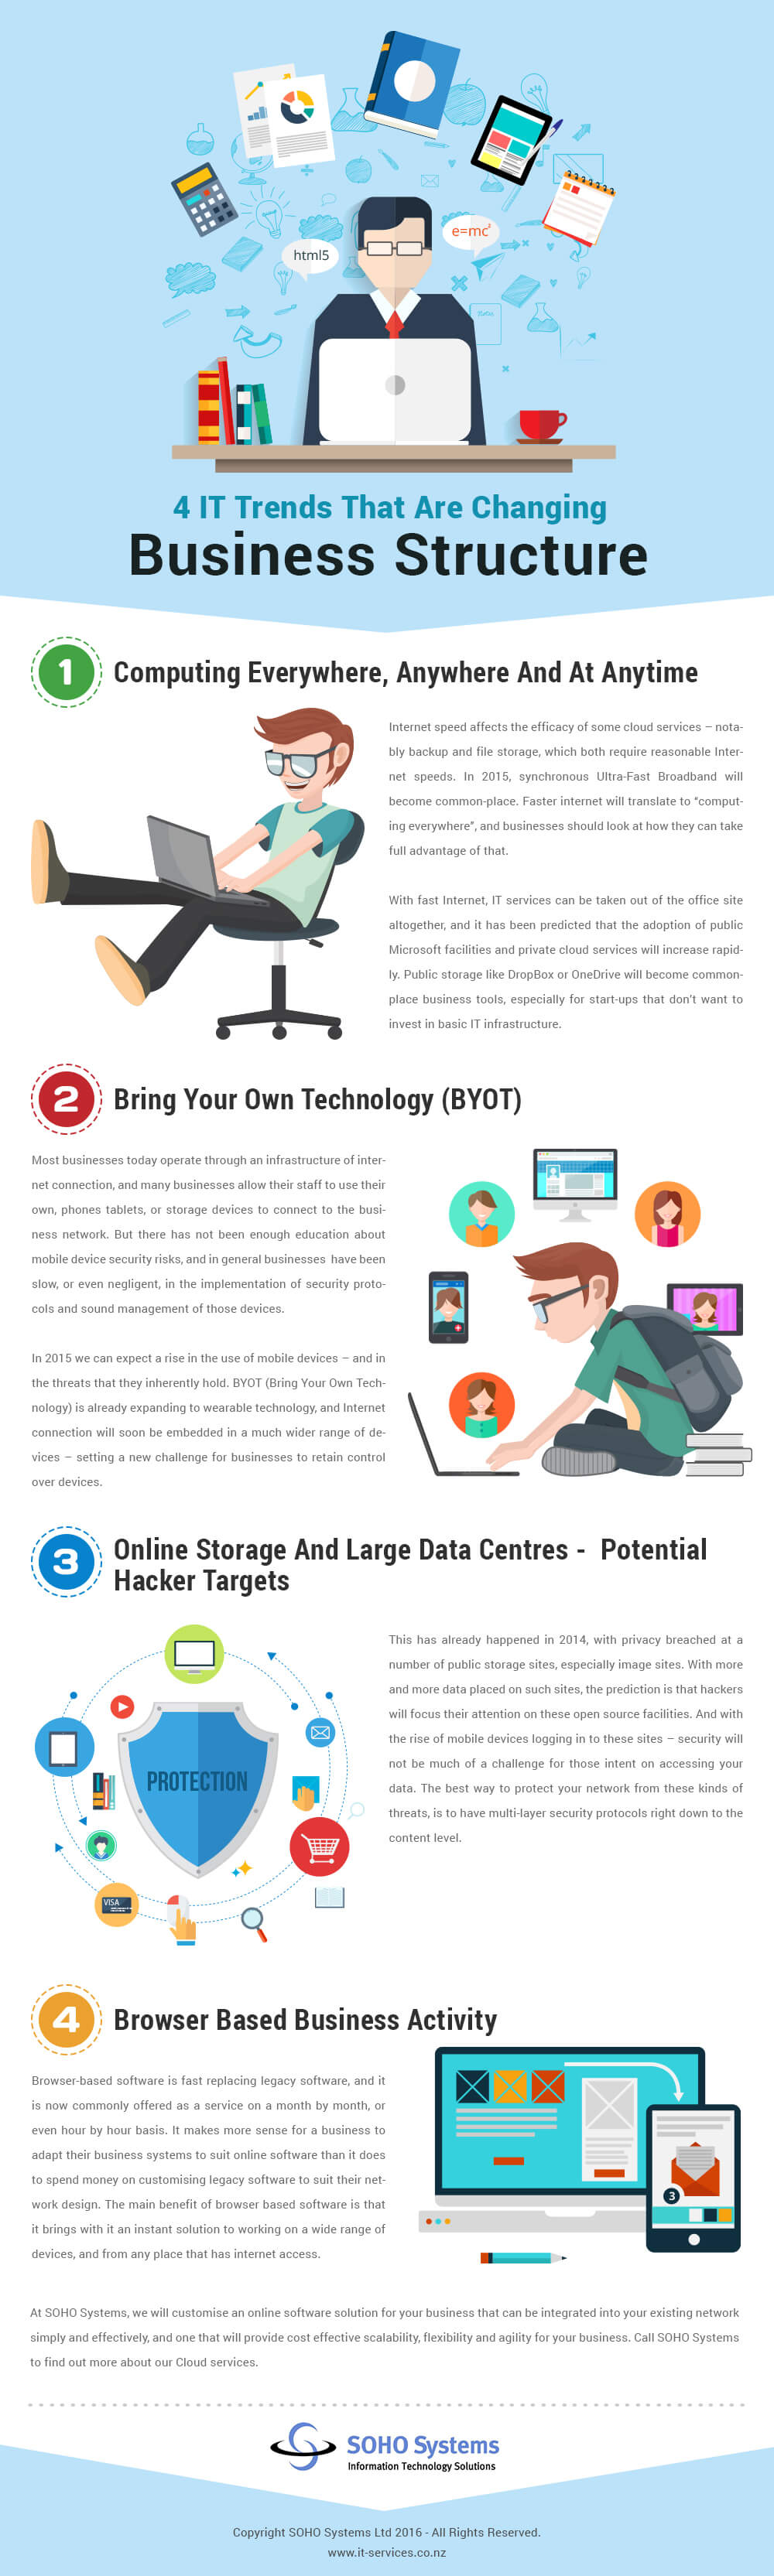 IT-trends-changing-business-structure-infographic-plaza